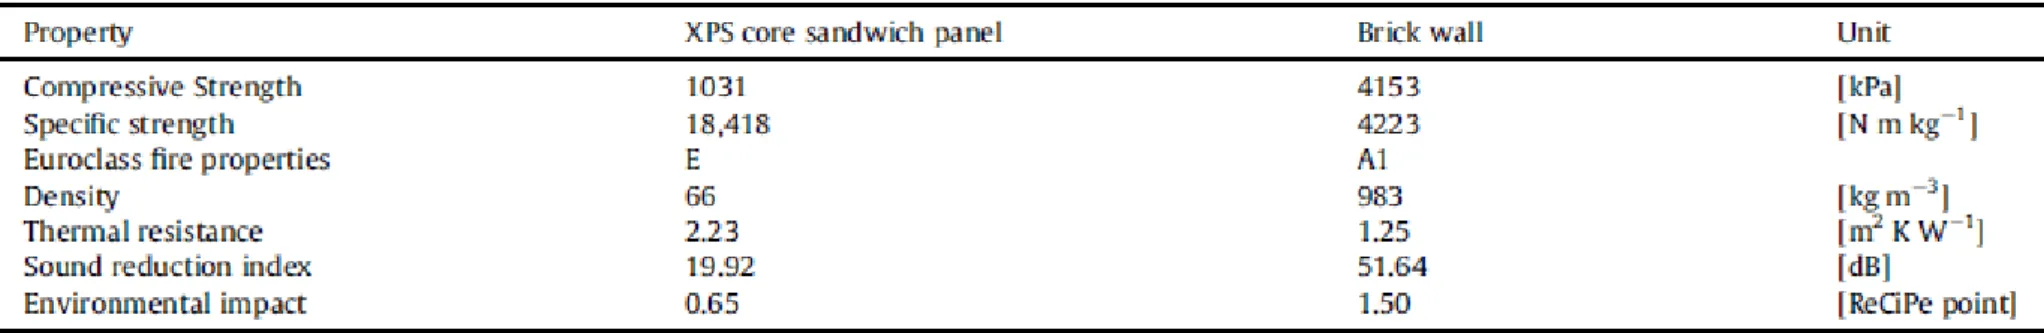 Table 10 Properties of the proposed sandwich panel solution compared with a typical brick wall